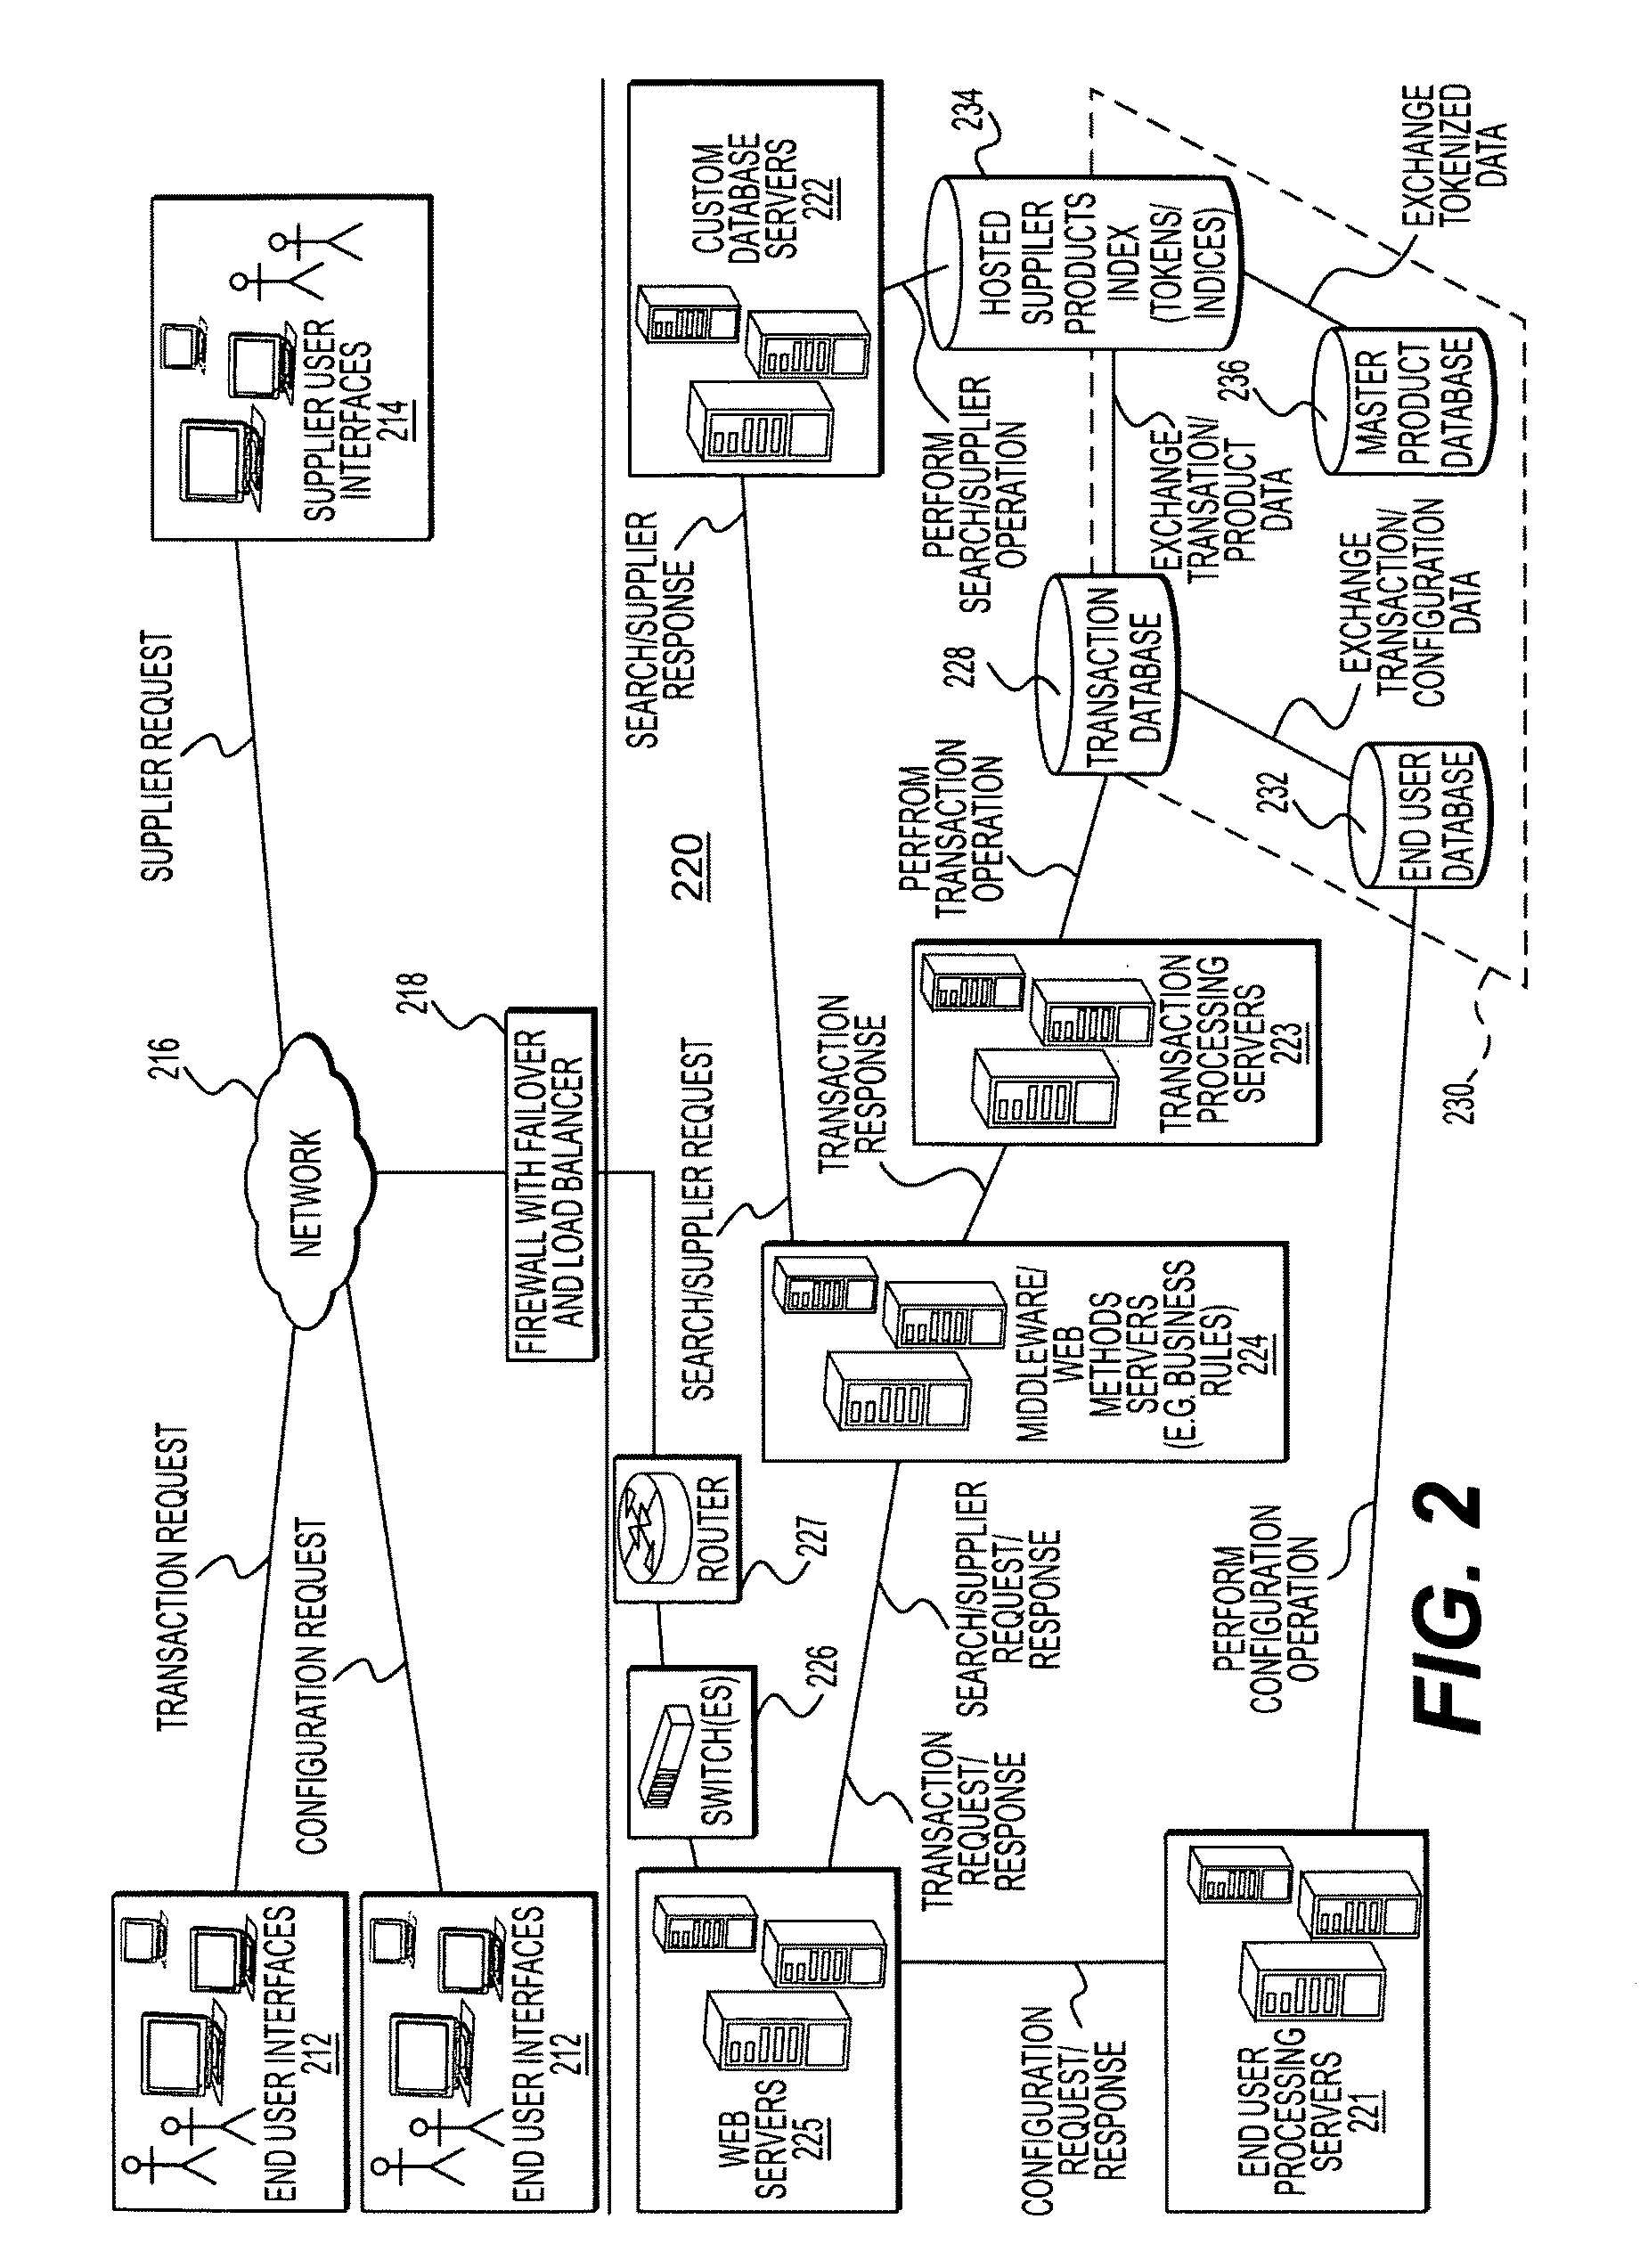 Method, medium, and system for automatically moving items from a first shopping cart to a second shopping cart